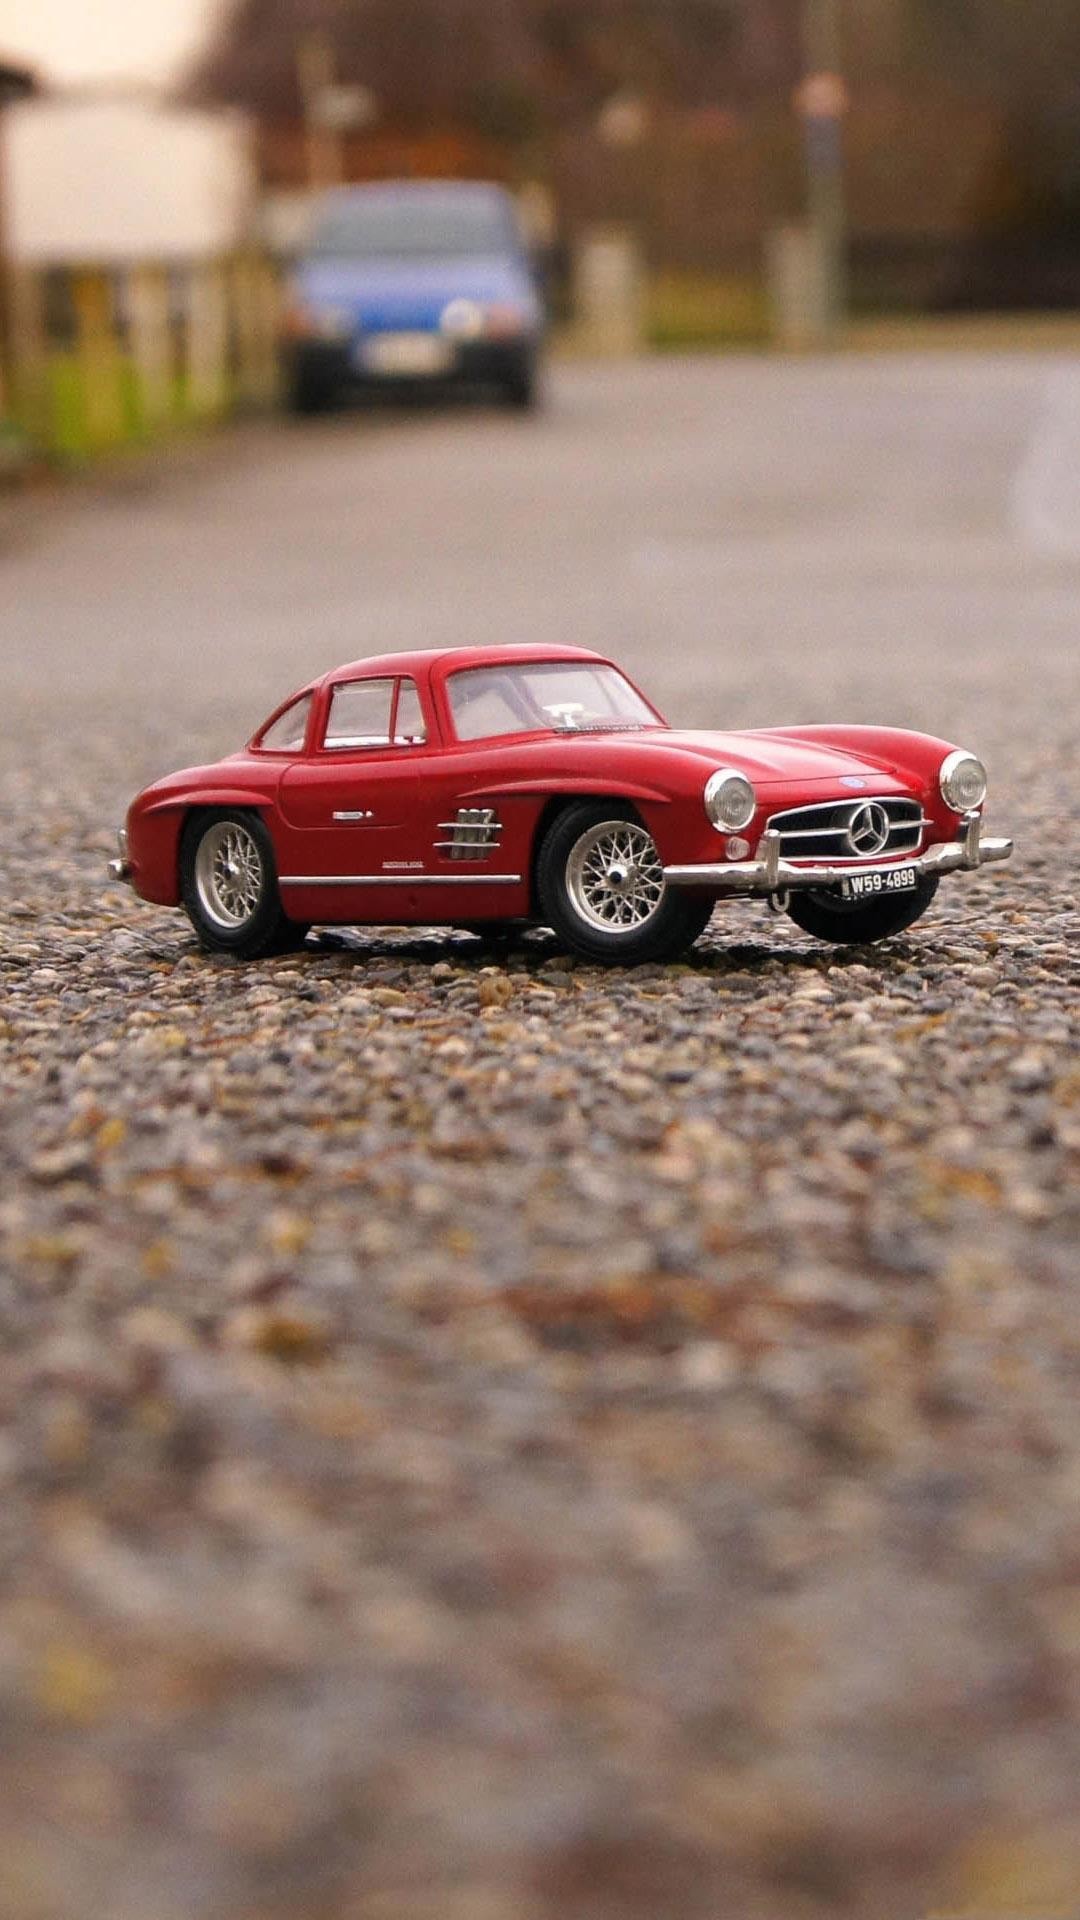 Vintage Mercedes Toy Car - Cute Hd Wallpapers For Mobile , HD Wallpaper & Backgrounds